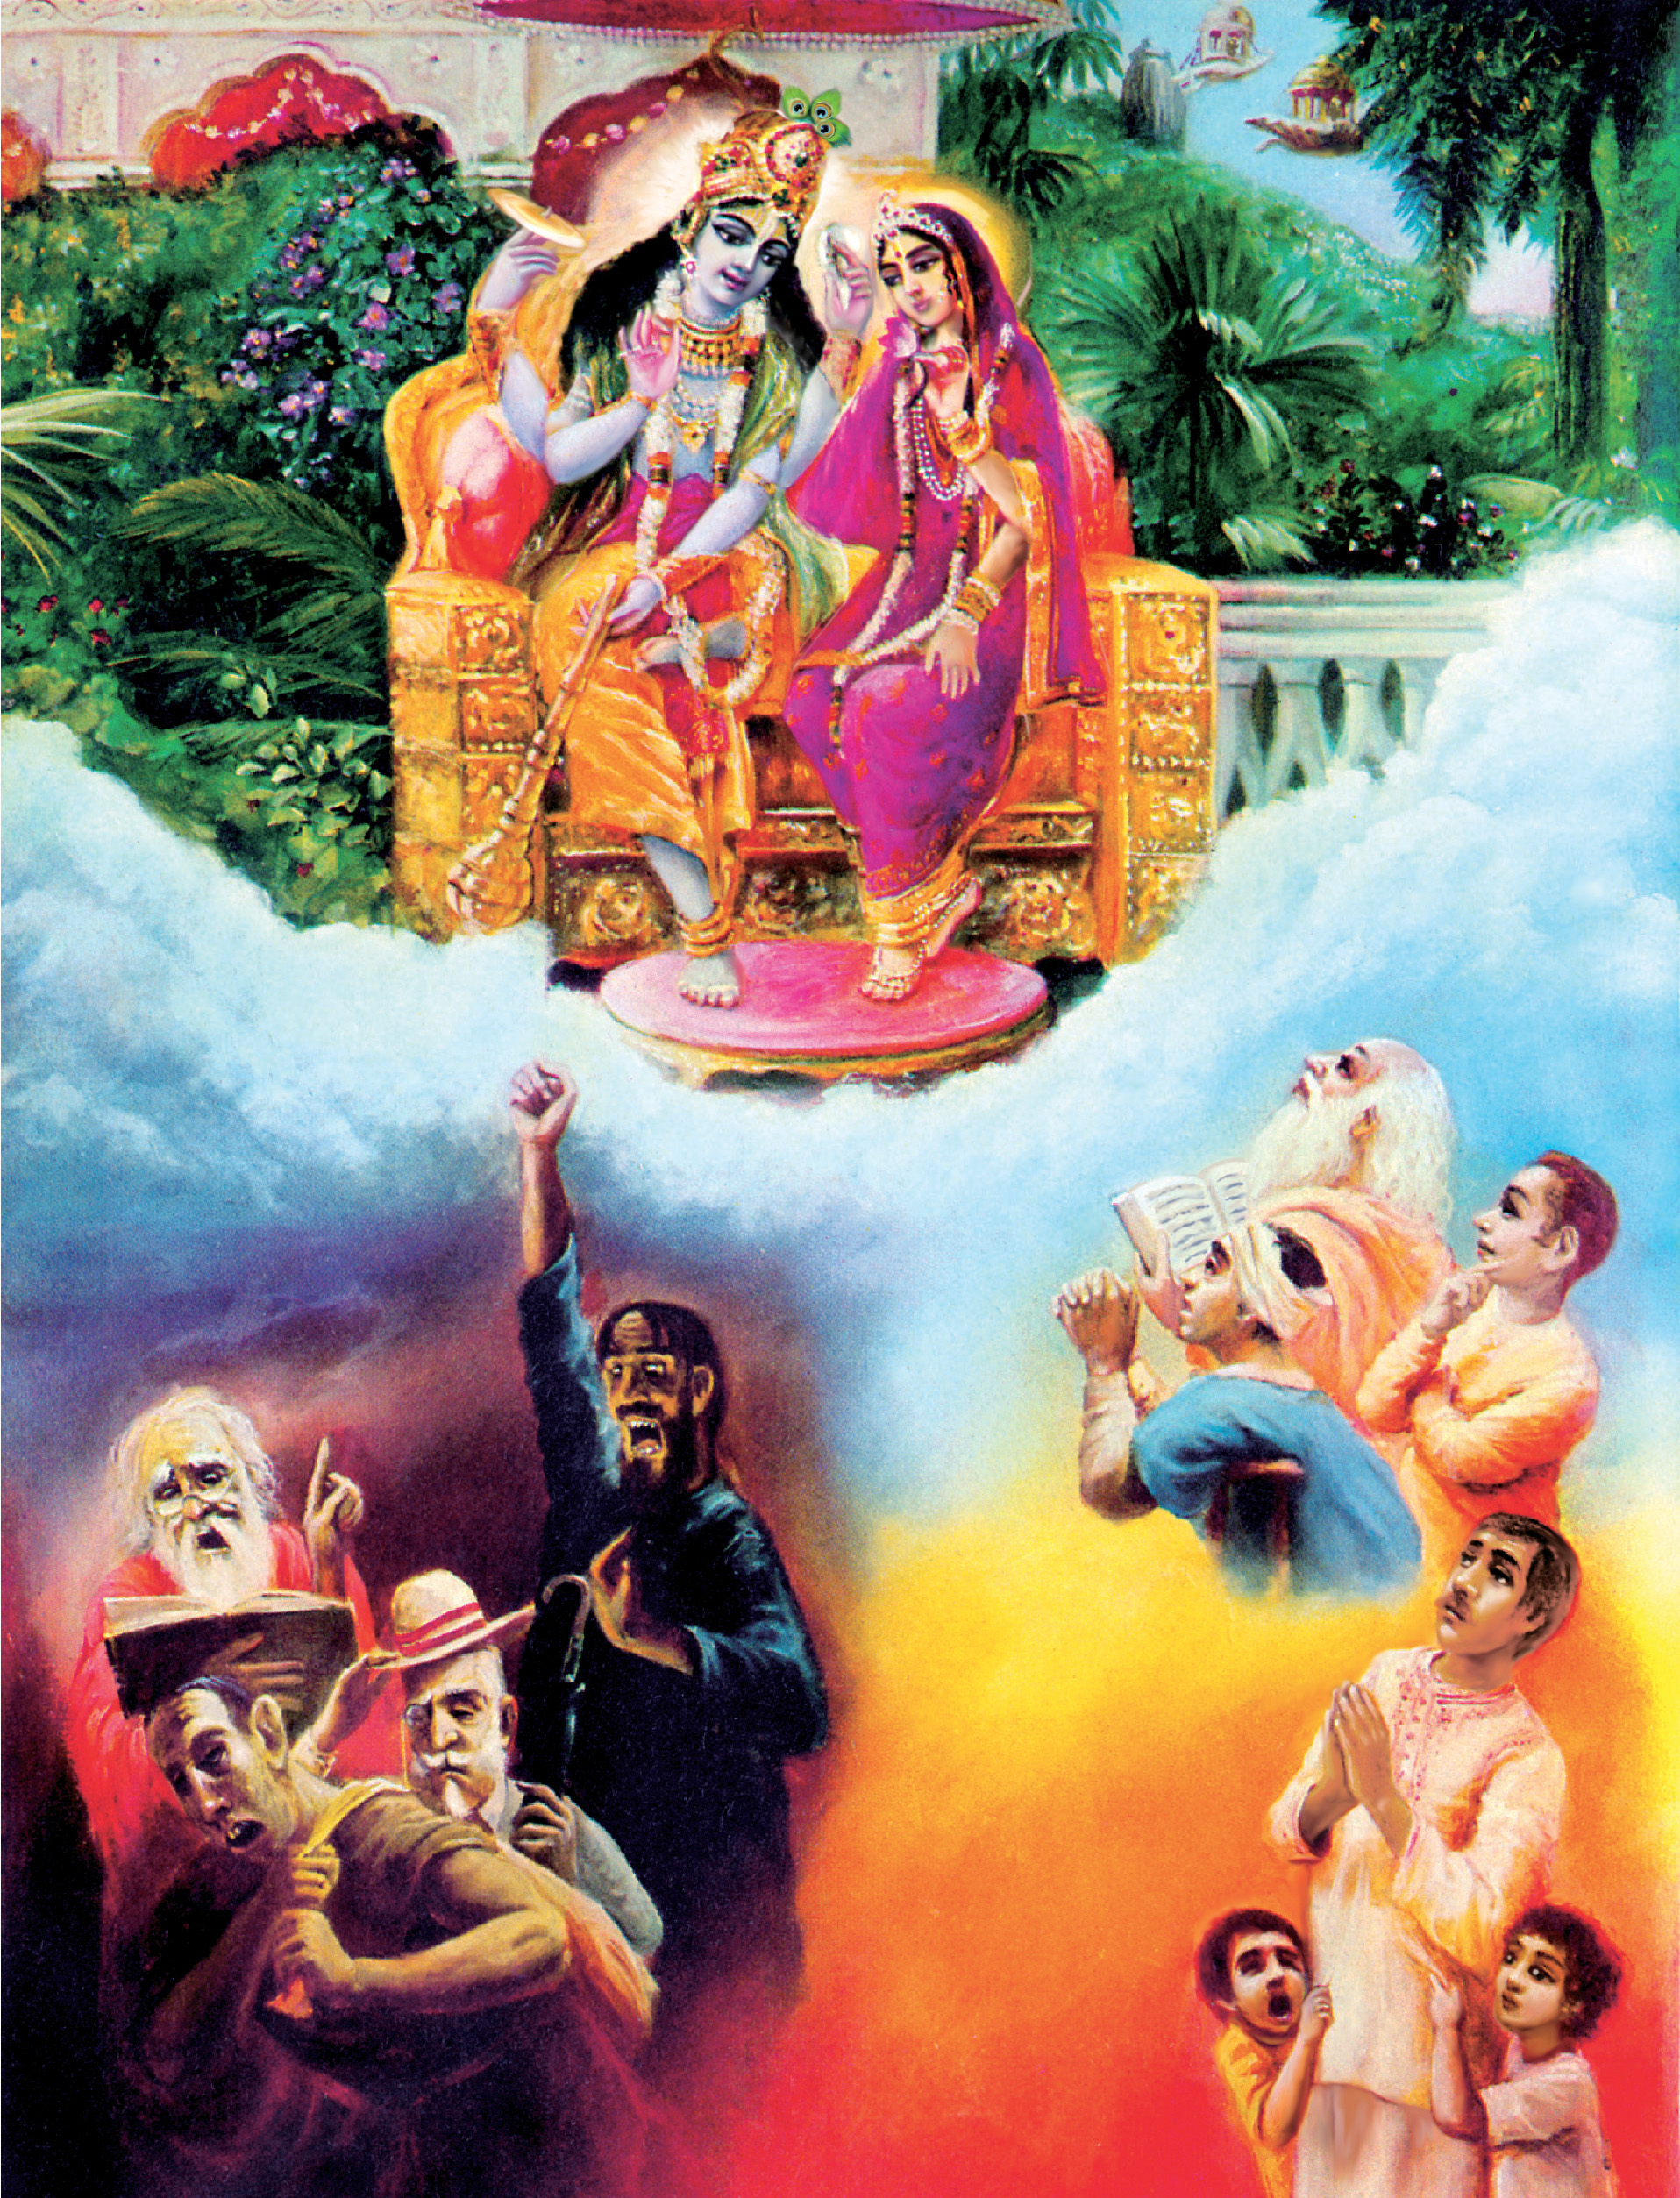 Bhagavad Gita: Four kinds of poius men surrender to Krishna, and four kinds of impious men do not.